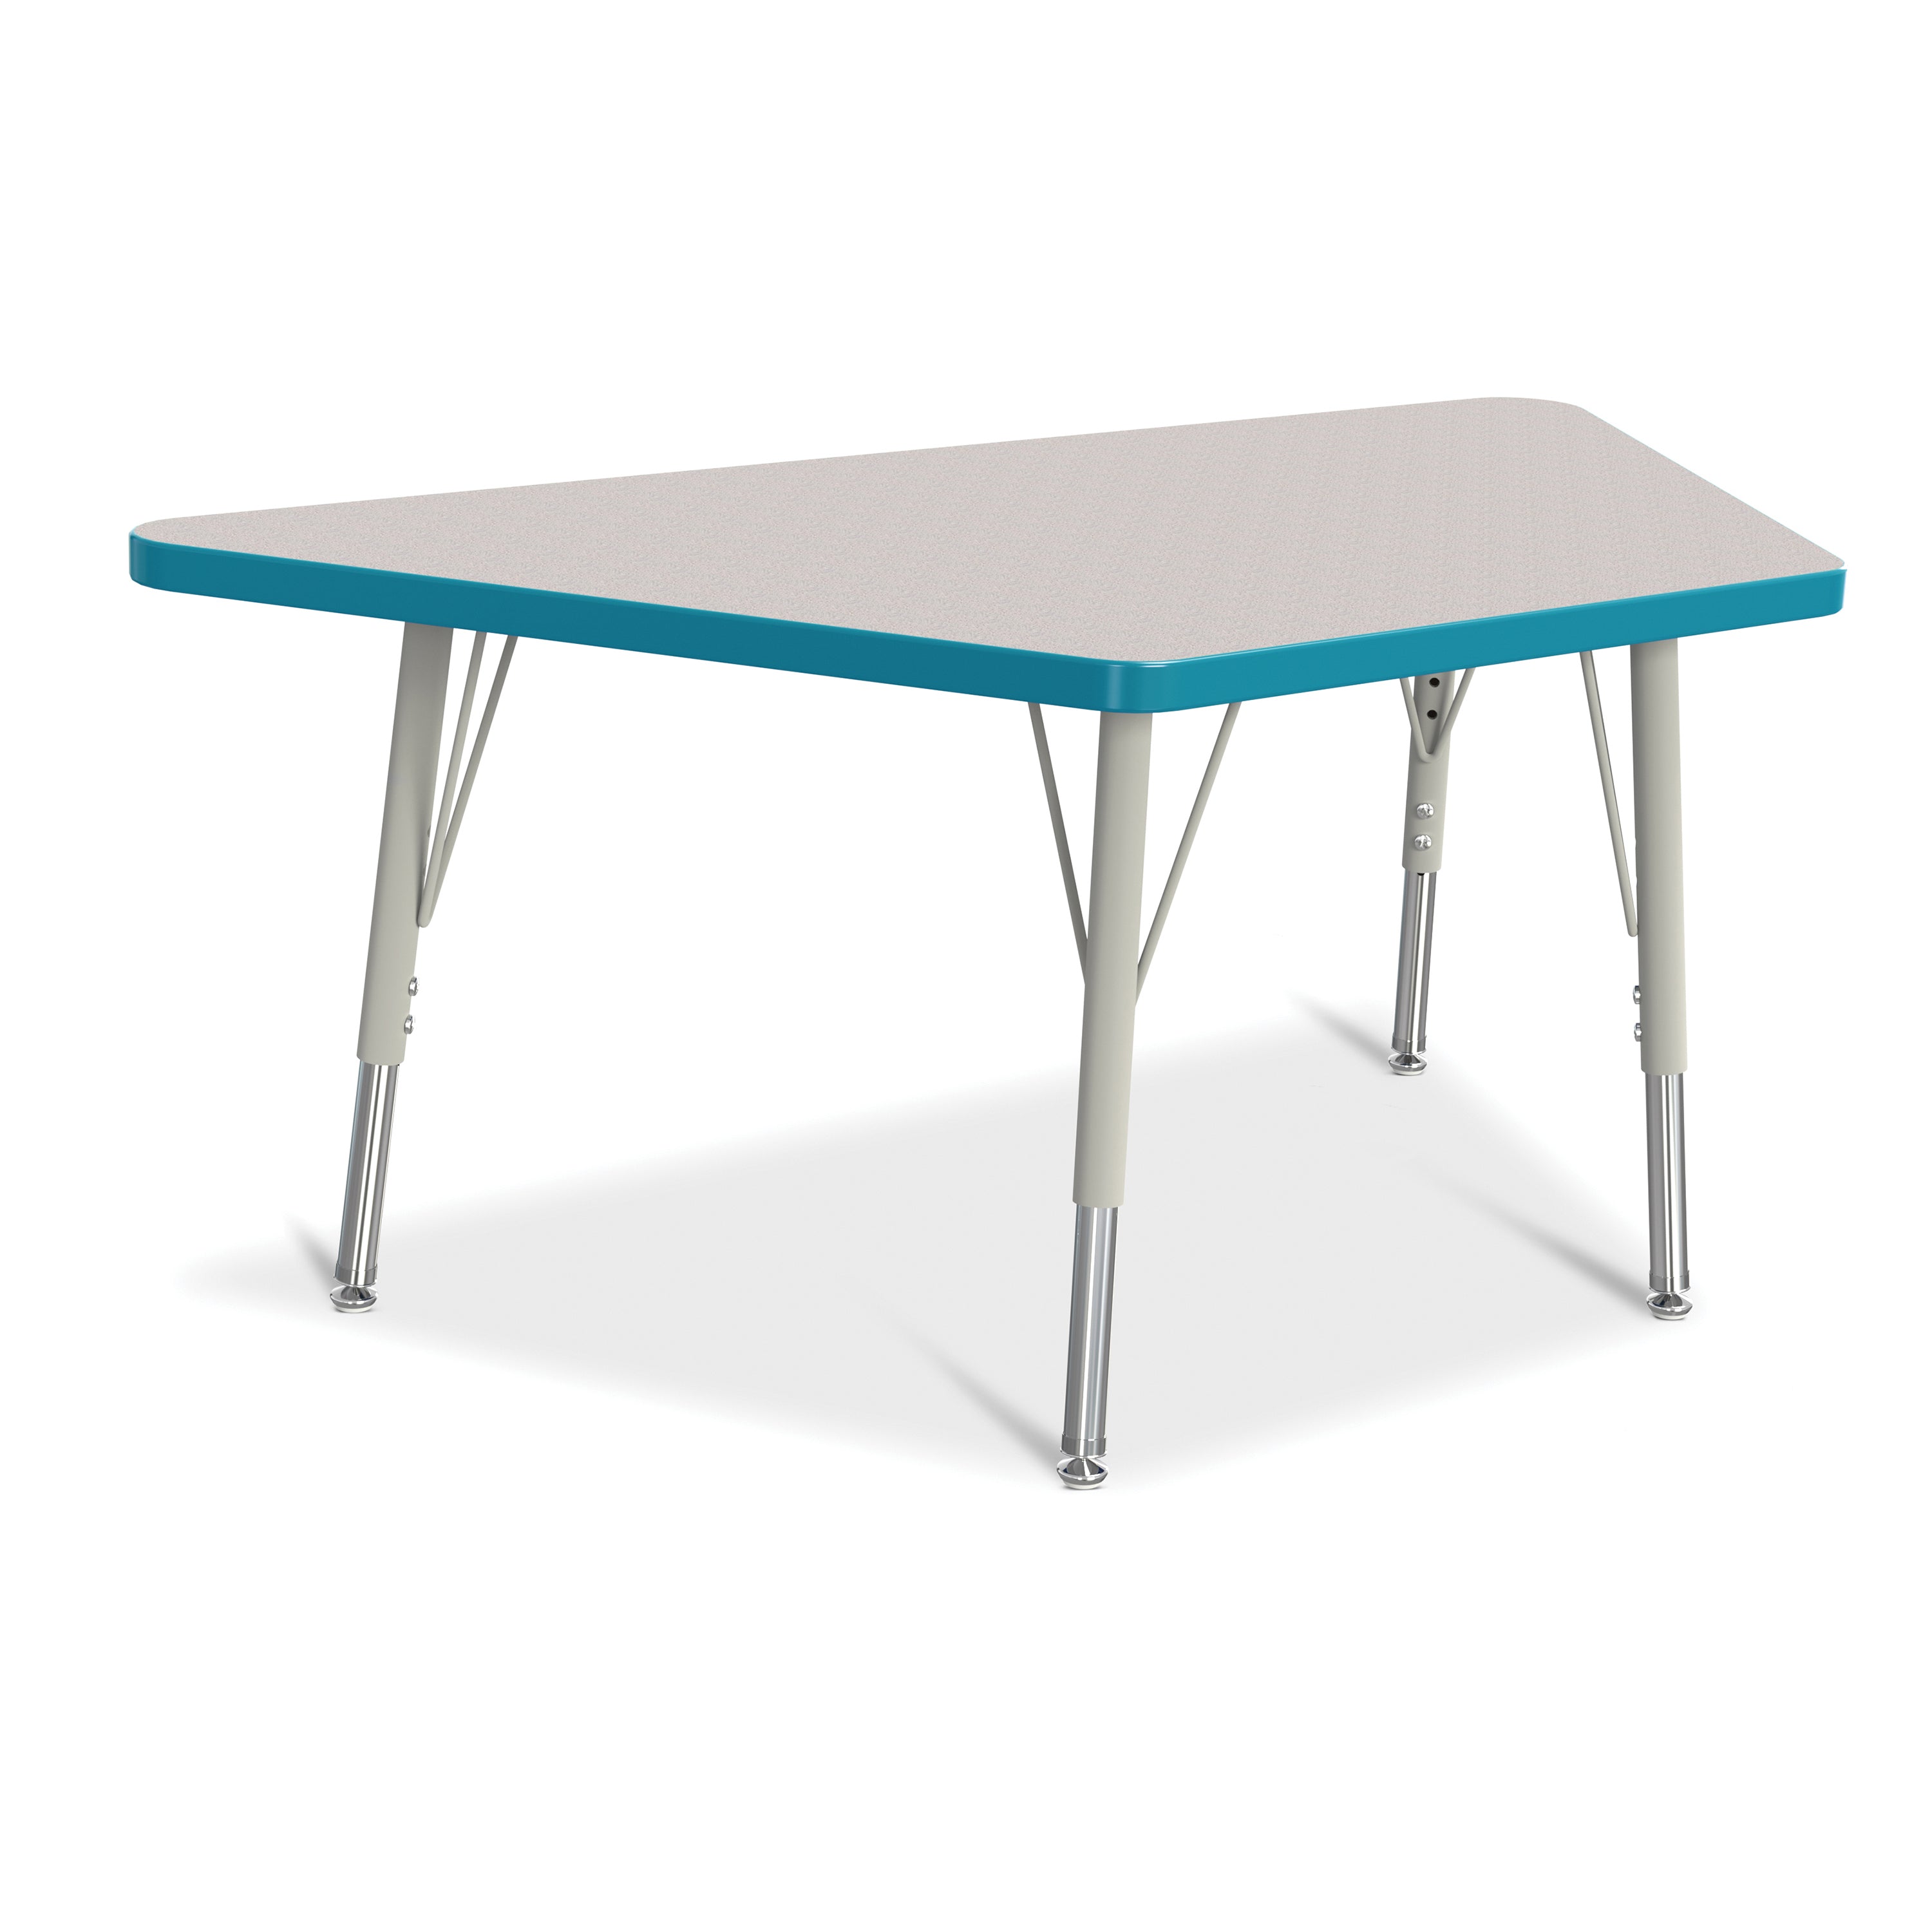 6438JCE005, Berries Trapezoid Activity Tables - 24" X 48", E-height - Freckled Gray/Teal/Gray